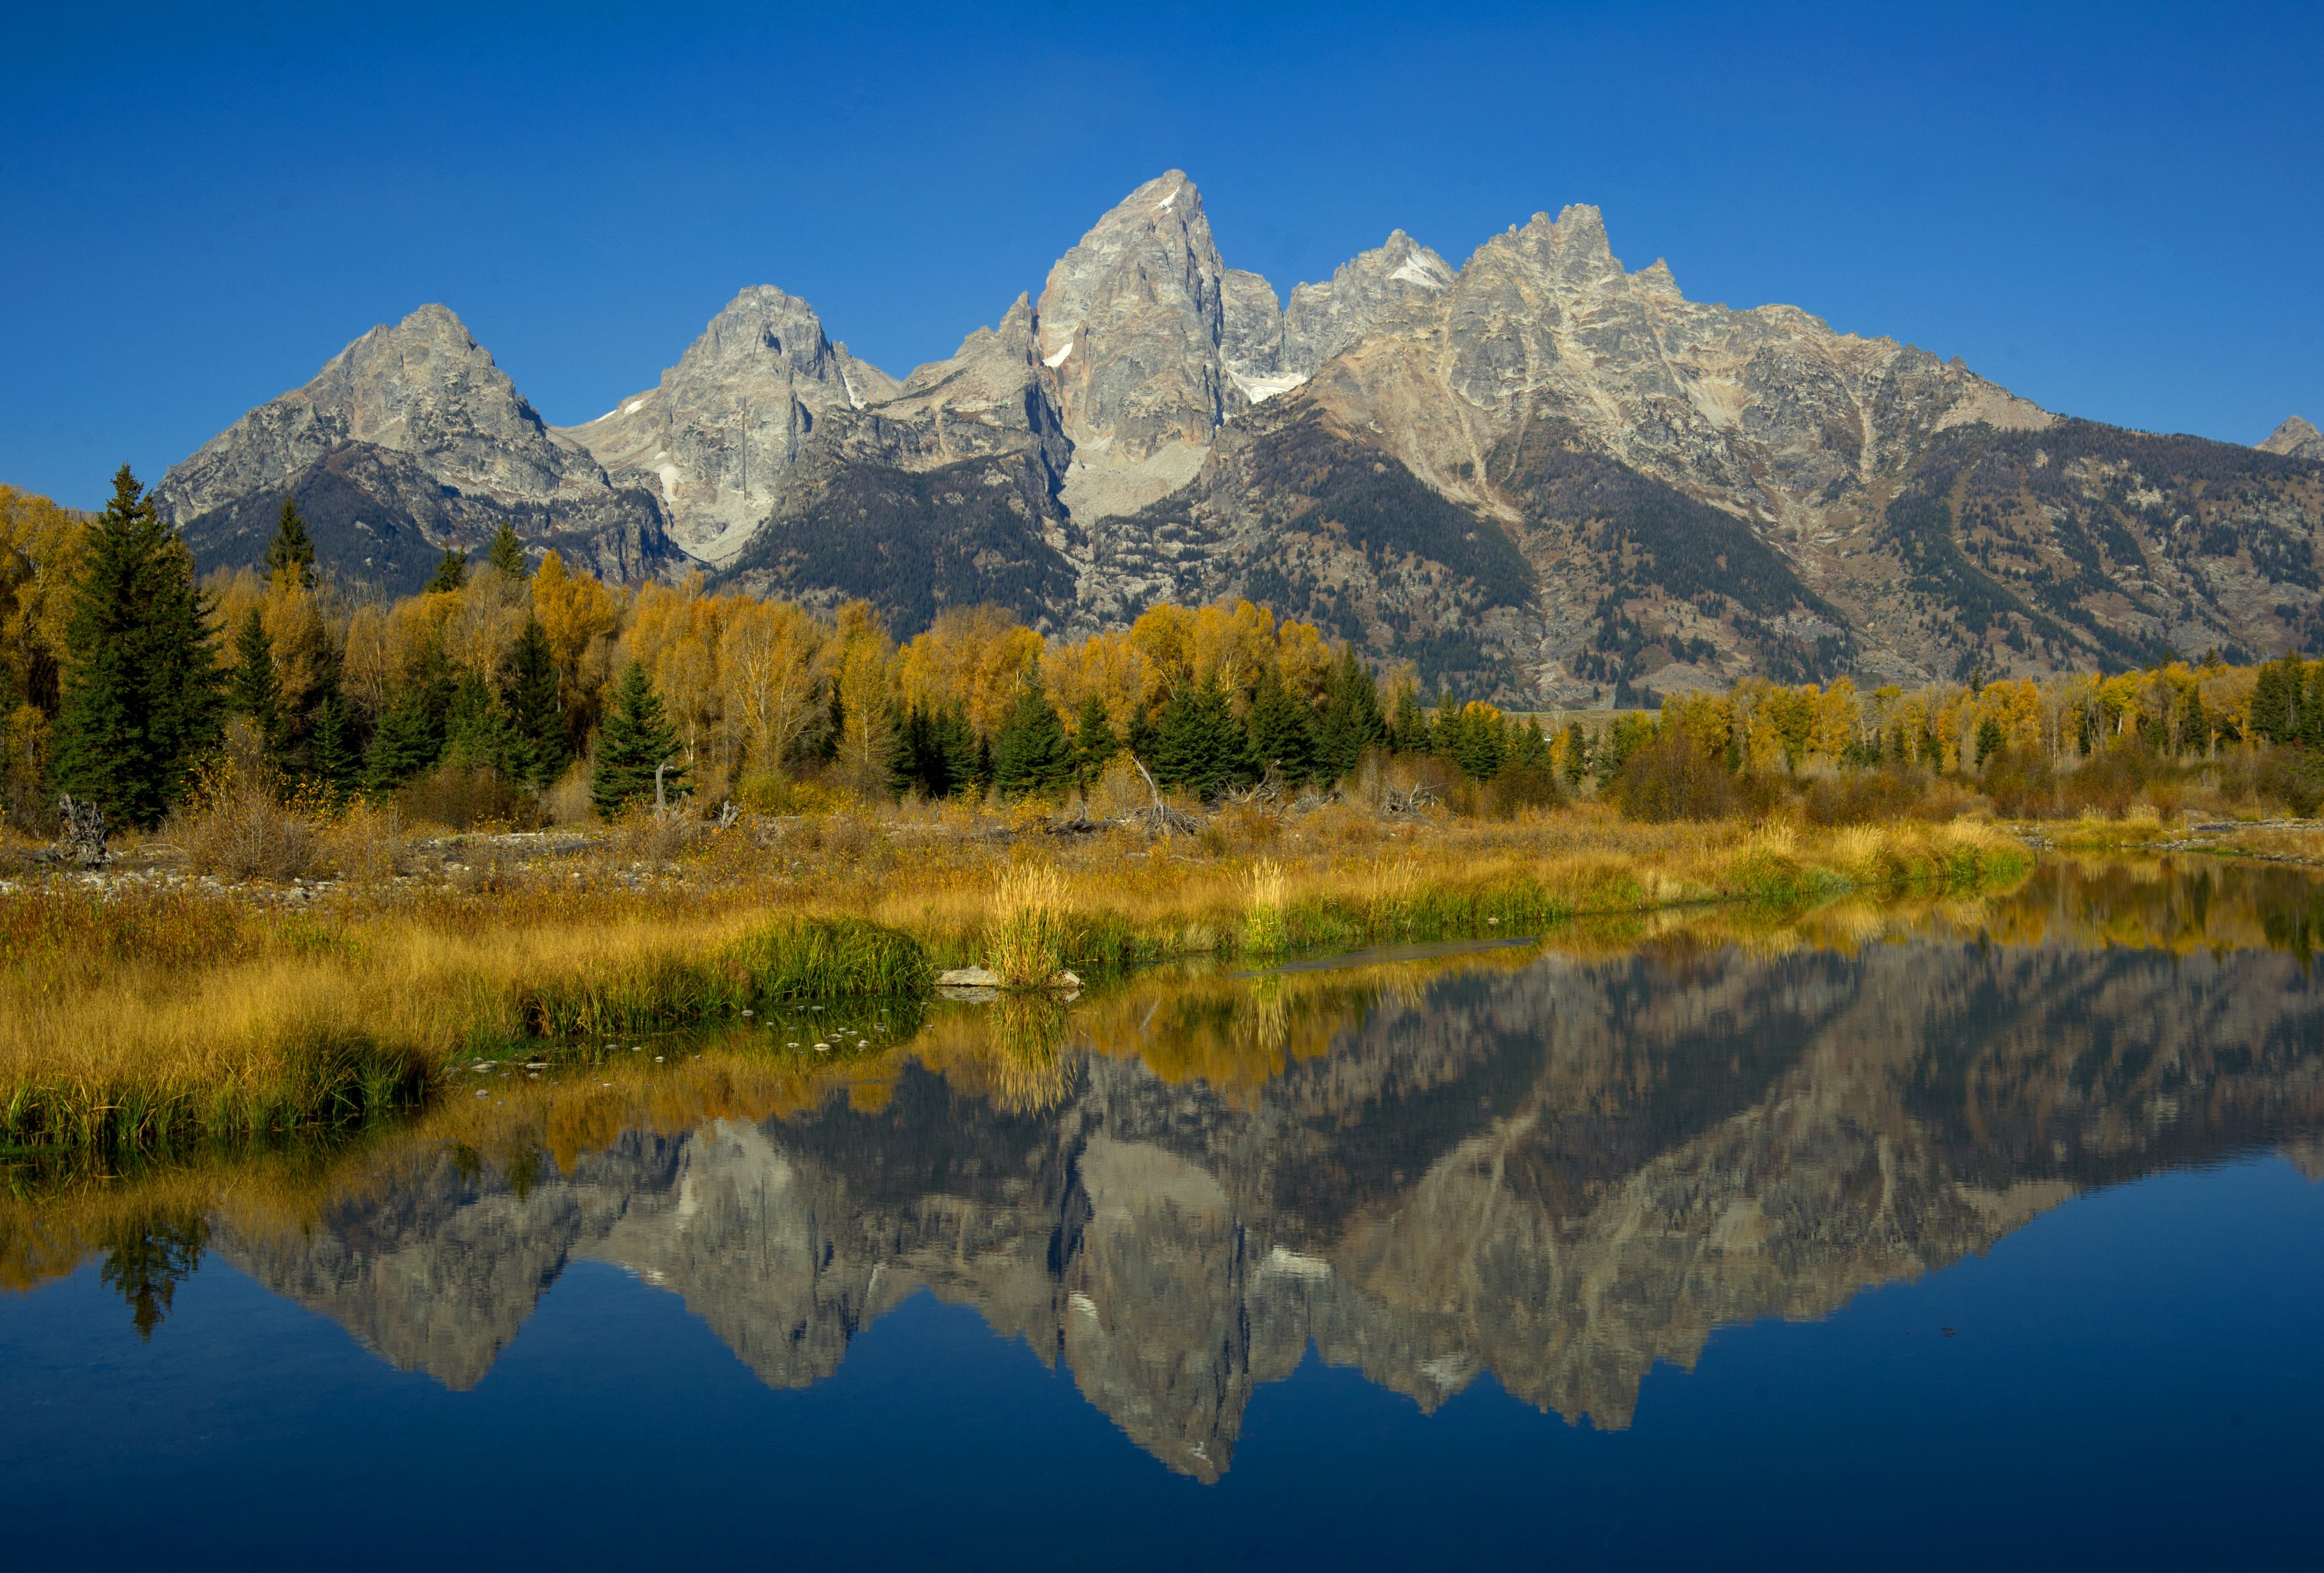 In fall in Jackson, Wyoming, art and the outdoors collide